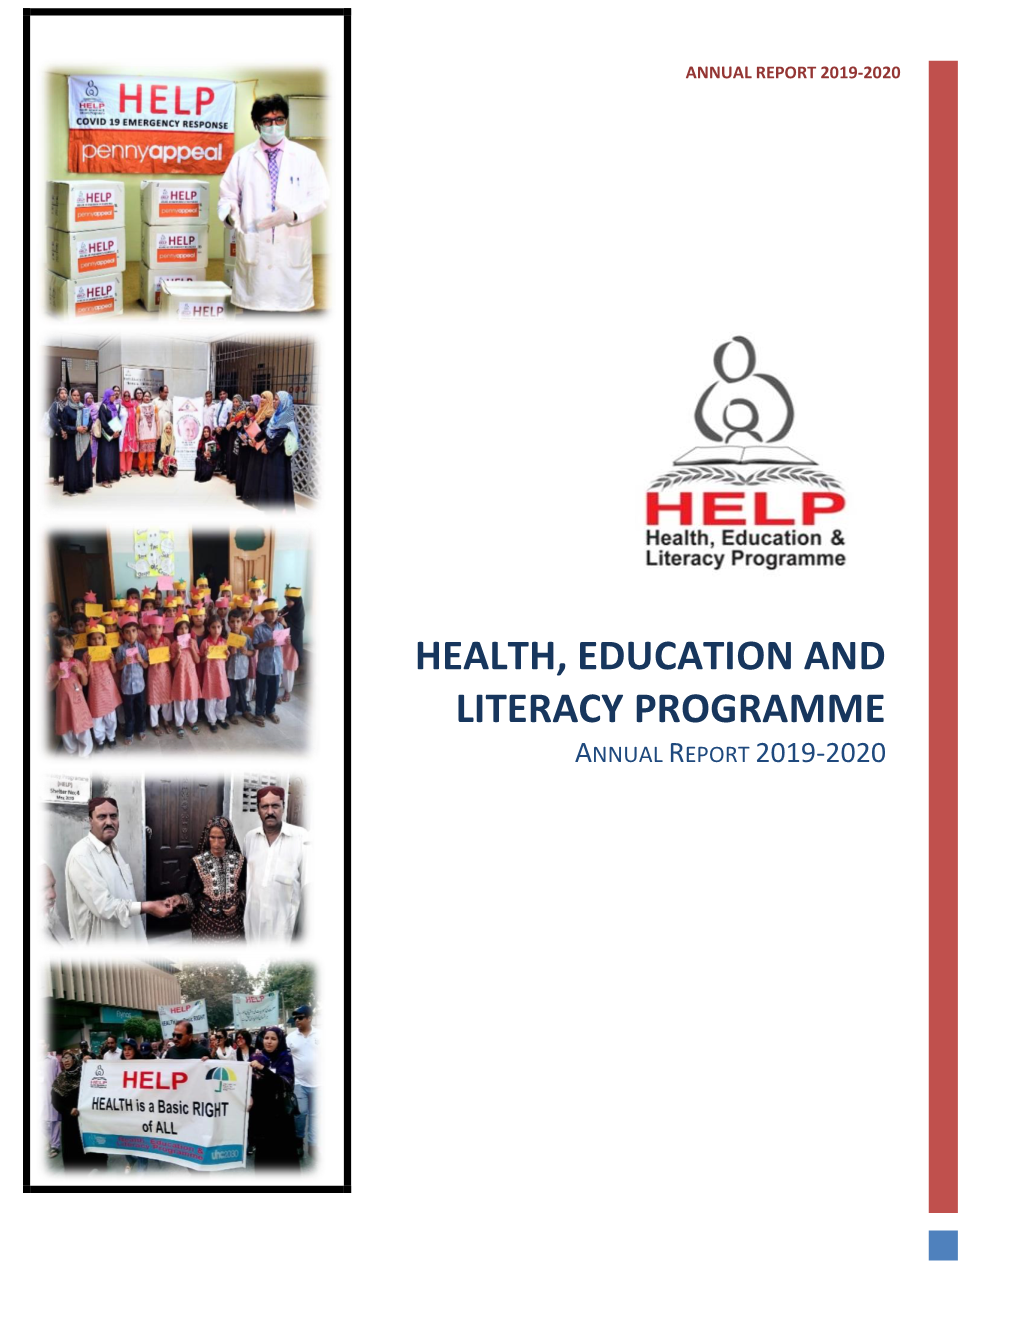 Health, Education and Literacy Programme Annual Report 2019-2020